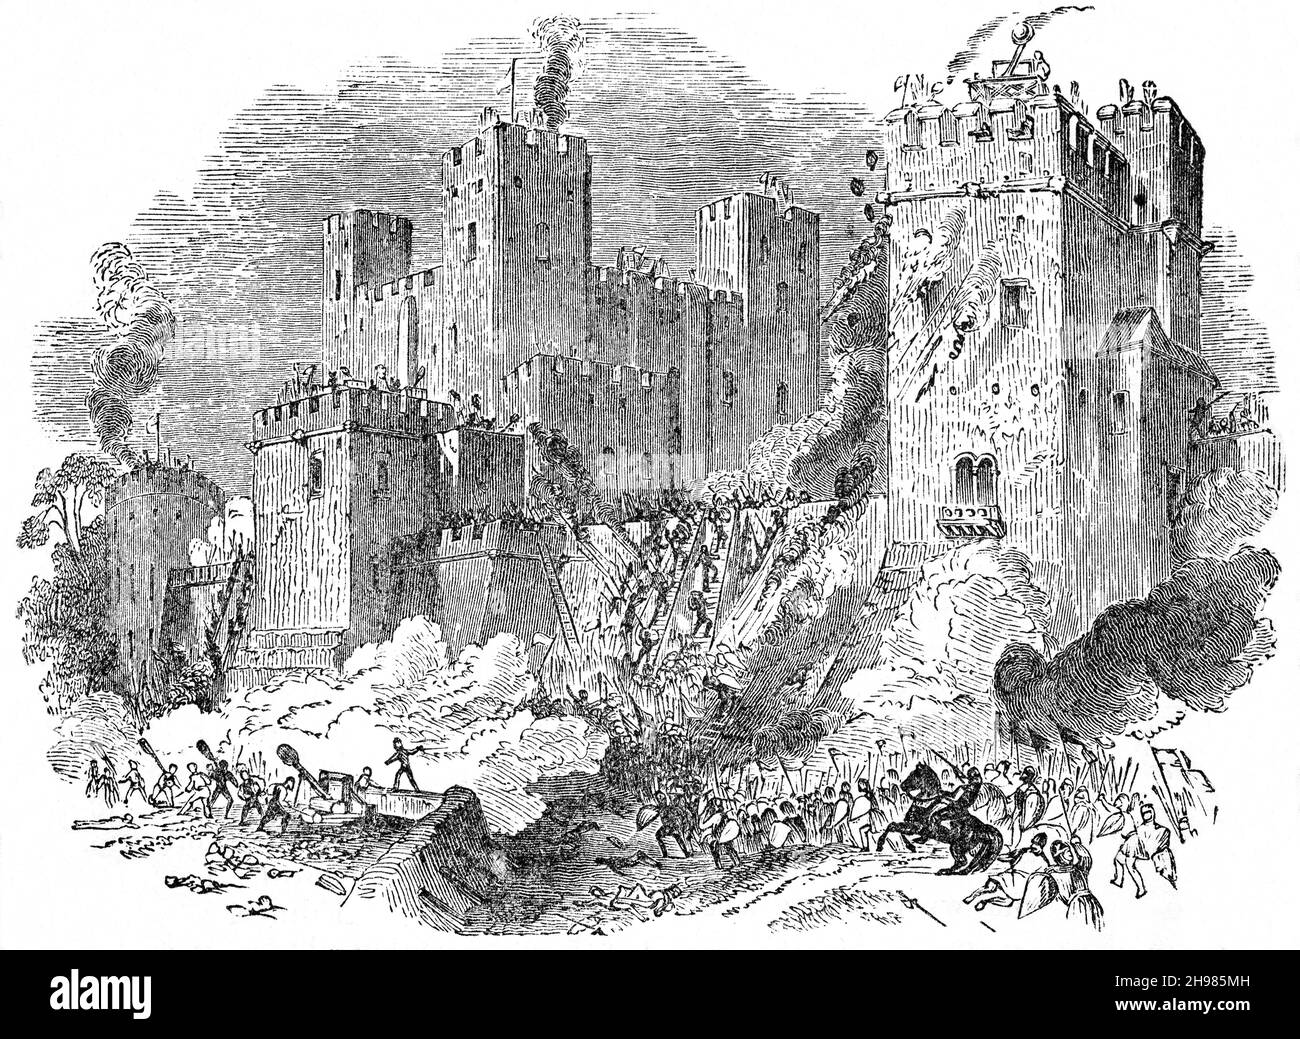 A late 19th Century illustration of the seige of 12th-century Rochester Castle on the east bank of the River Medway in Rochester, Kent, South East England. During the First Barons' War (1215–1217) in King John's reign, baronial forces captured the castle from Archbishop Stephen Langton and held it against the king, who then besieged it. After resisting for just over seven weeks, the castle was badly damaged, with breaches in the outer walls and one corner of the keep collapsed; hunger eventually forced the defenders' hand and the garrison surrendered. Stock Photo